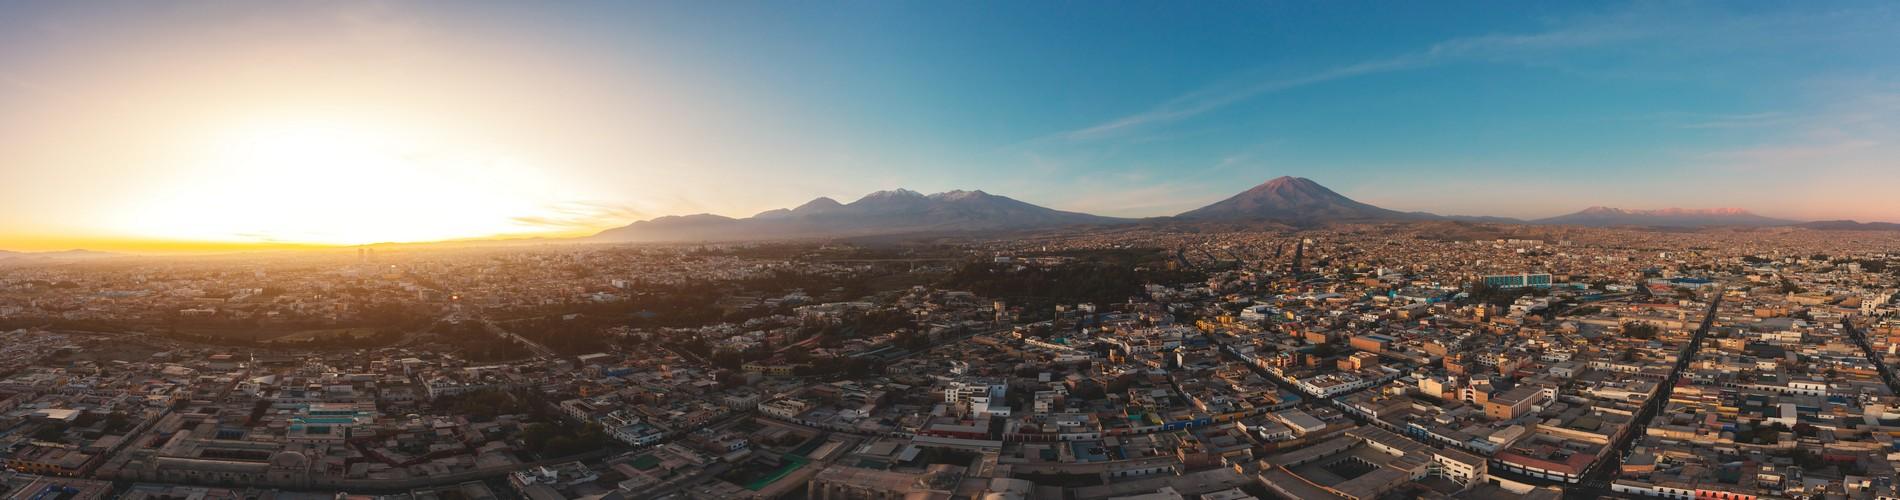 Arequipa - A city of Architectural Wealth, Gastronomy, and Amazing Sights